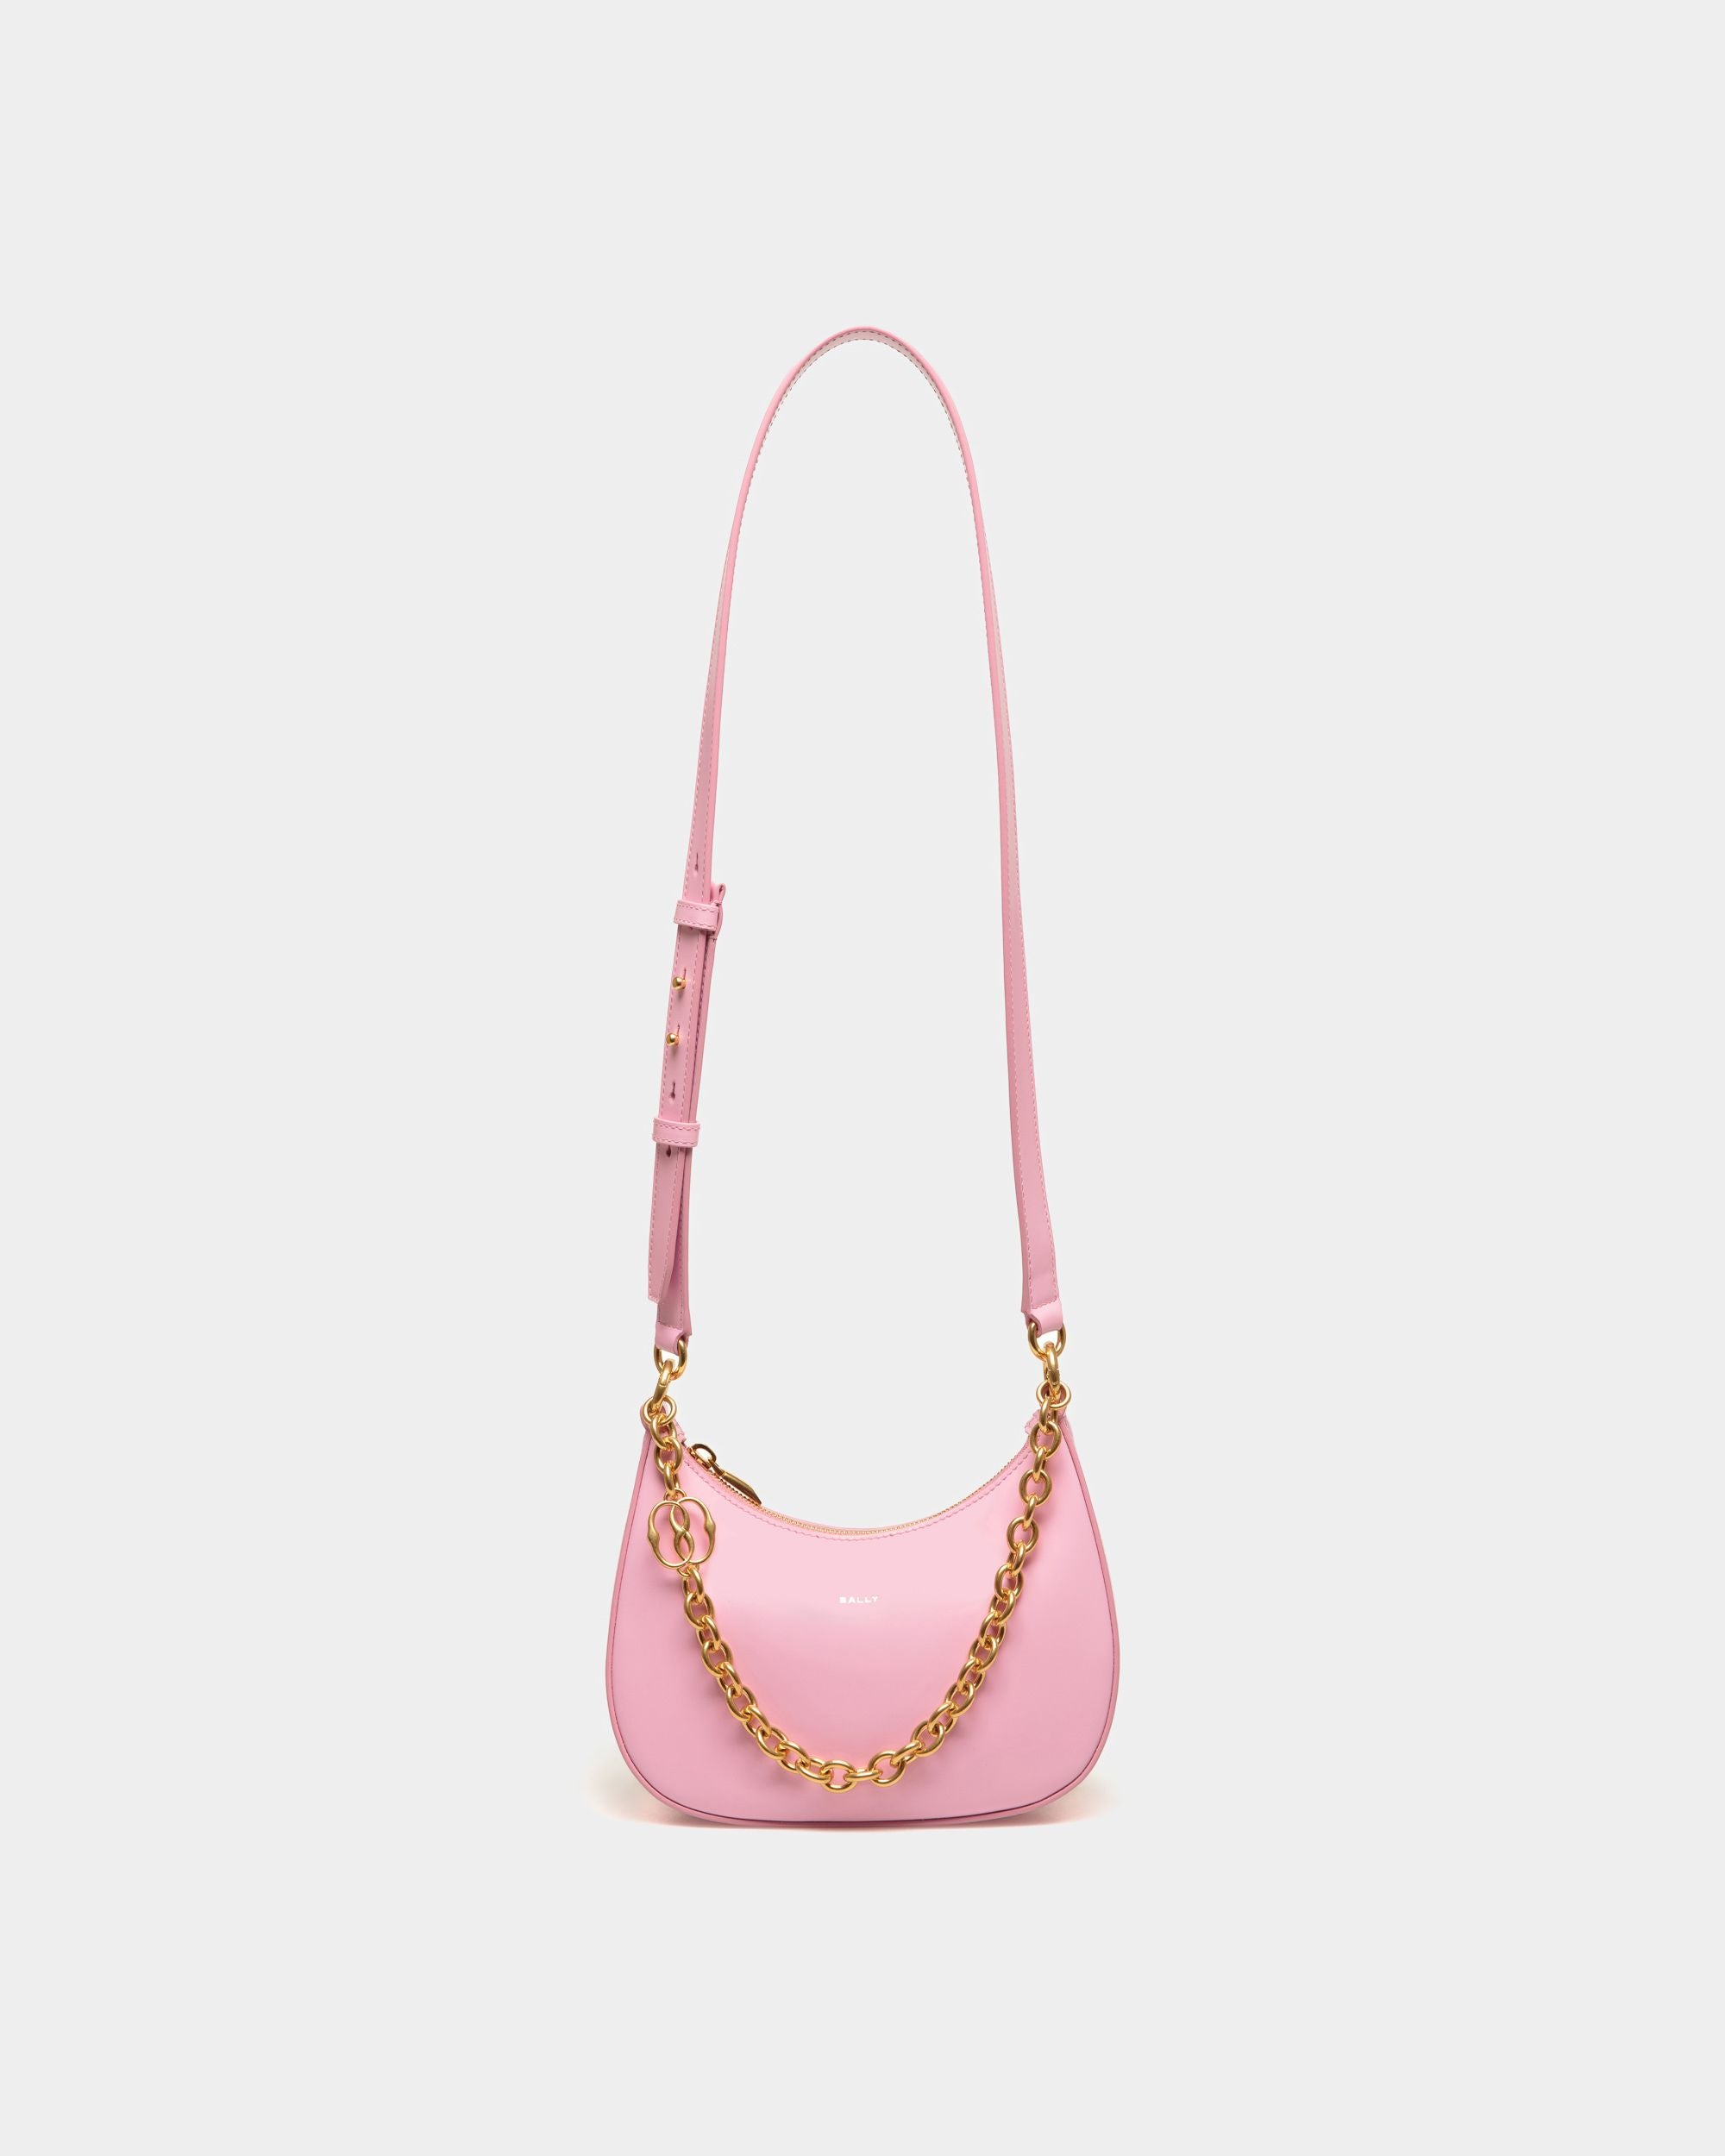 Emblem | Women's Mini Crossbody Bag in Pink Brushed Leather | Bally | Still Life Front